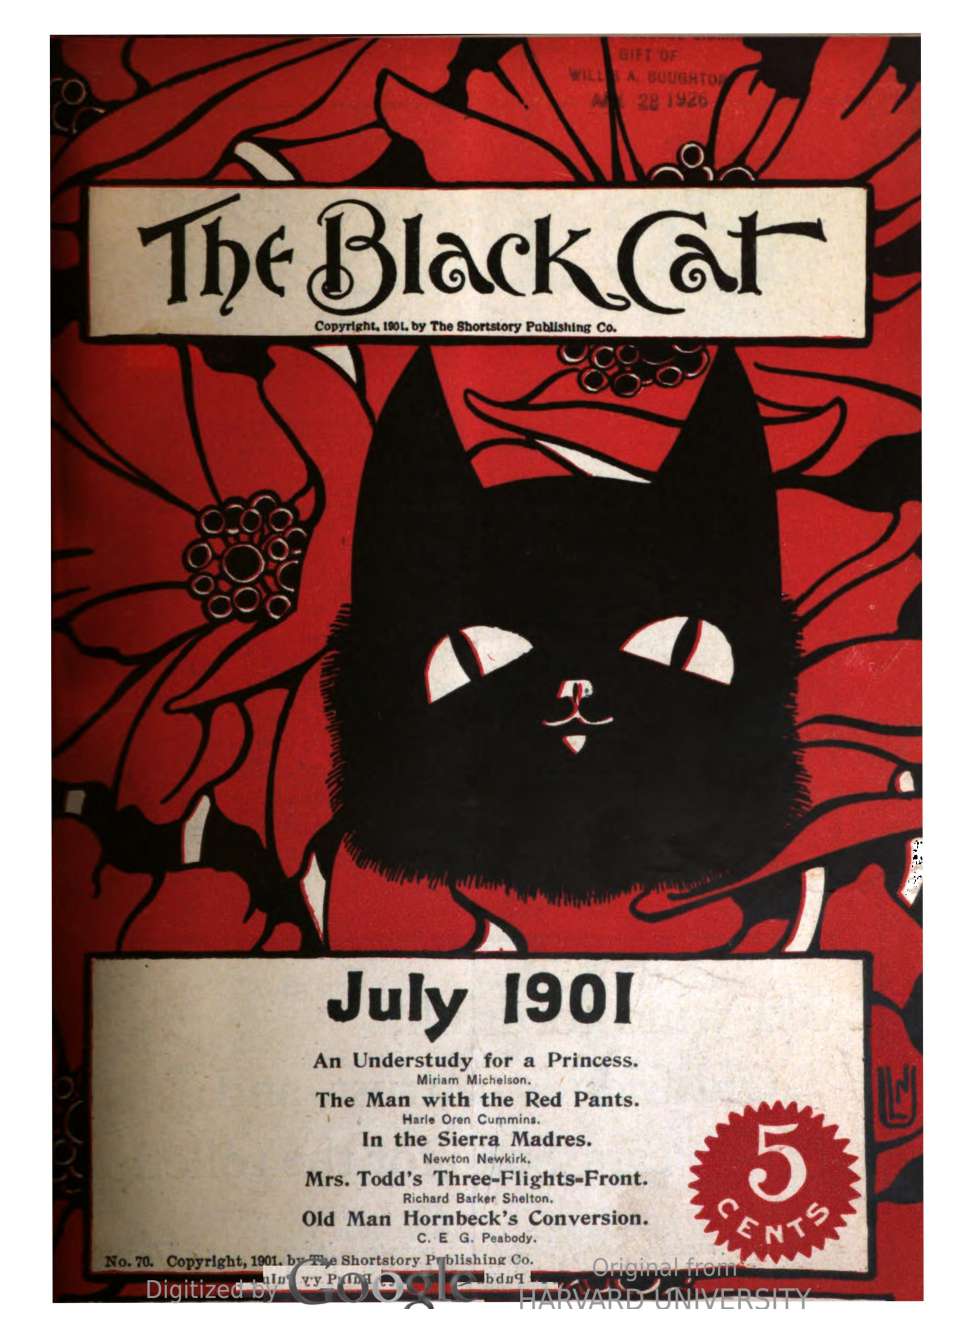 Book Cover For The Black Cat v6 10 - An Understudy for a Princess - Miriam Michelson